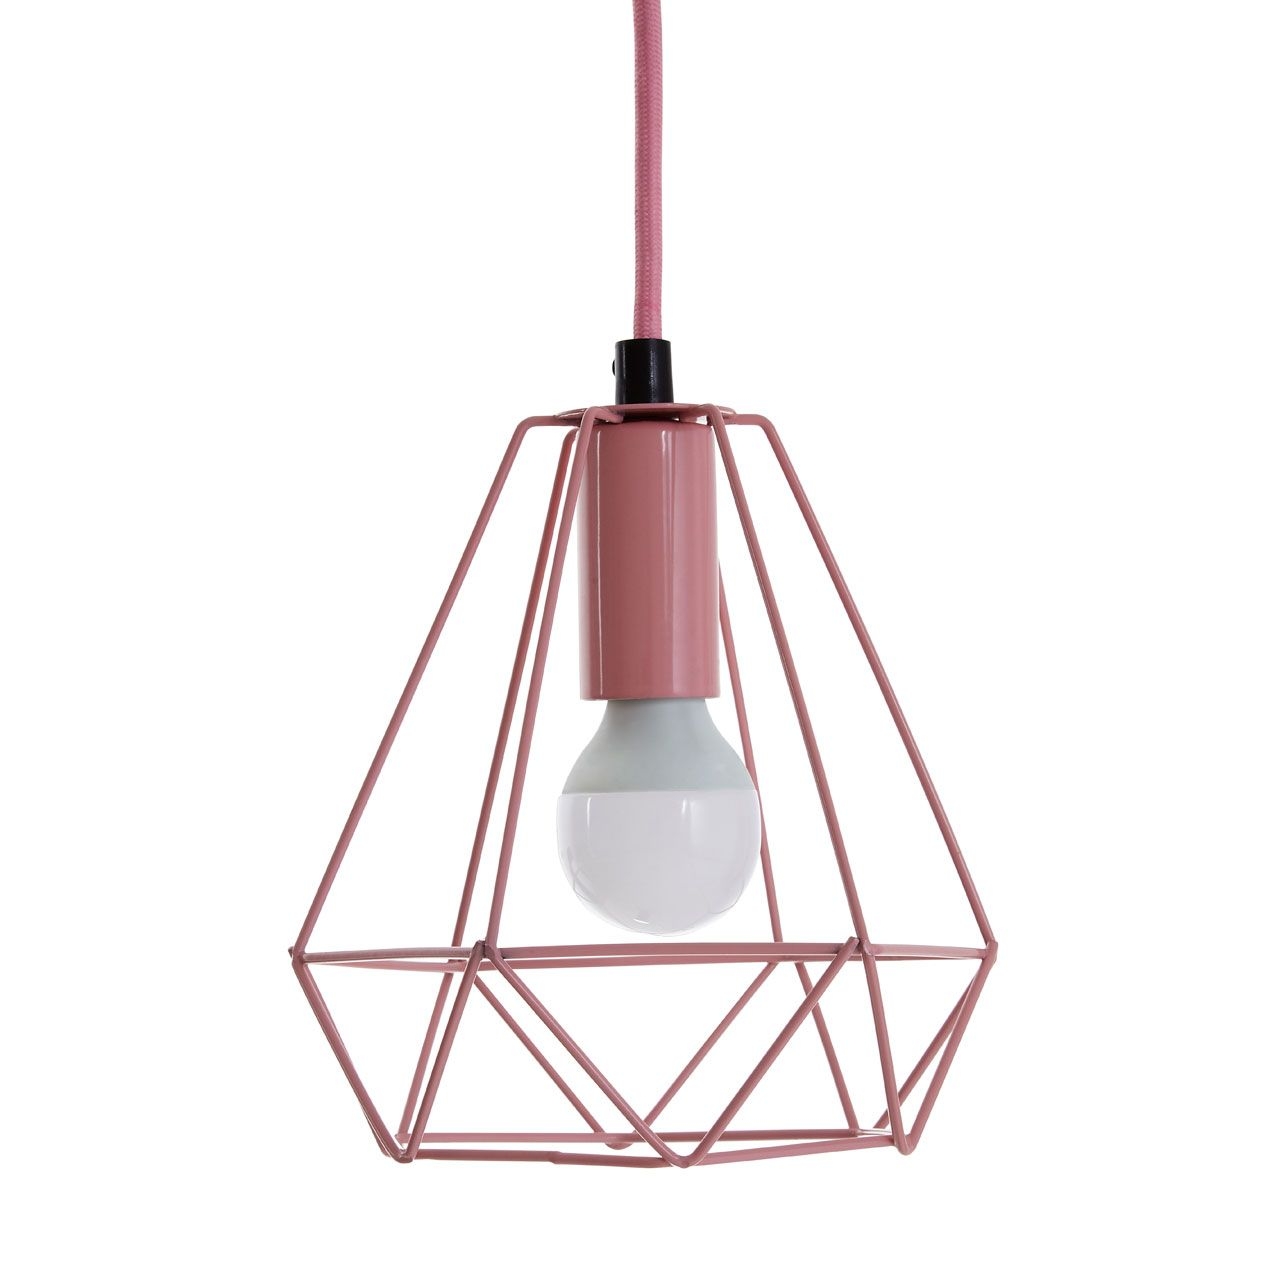 Beli Ceiling Pendant Light In Pink With Geometric Metal Wire Frame